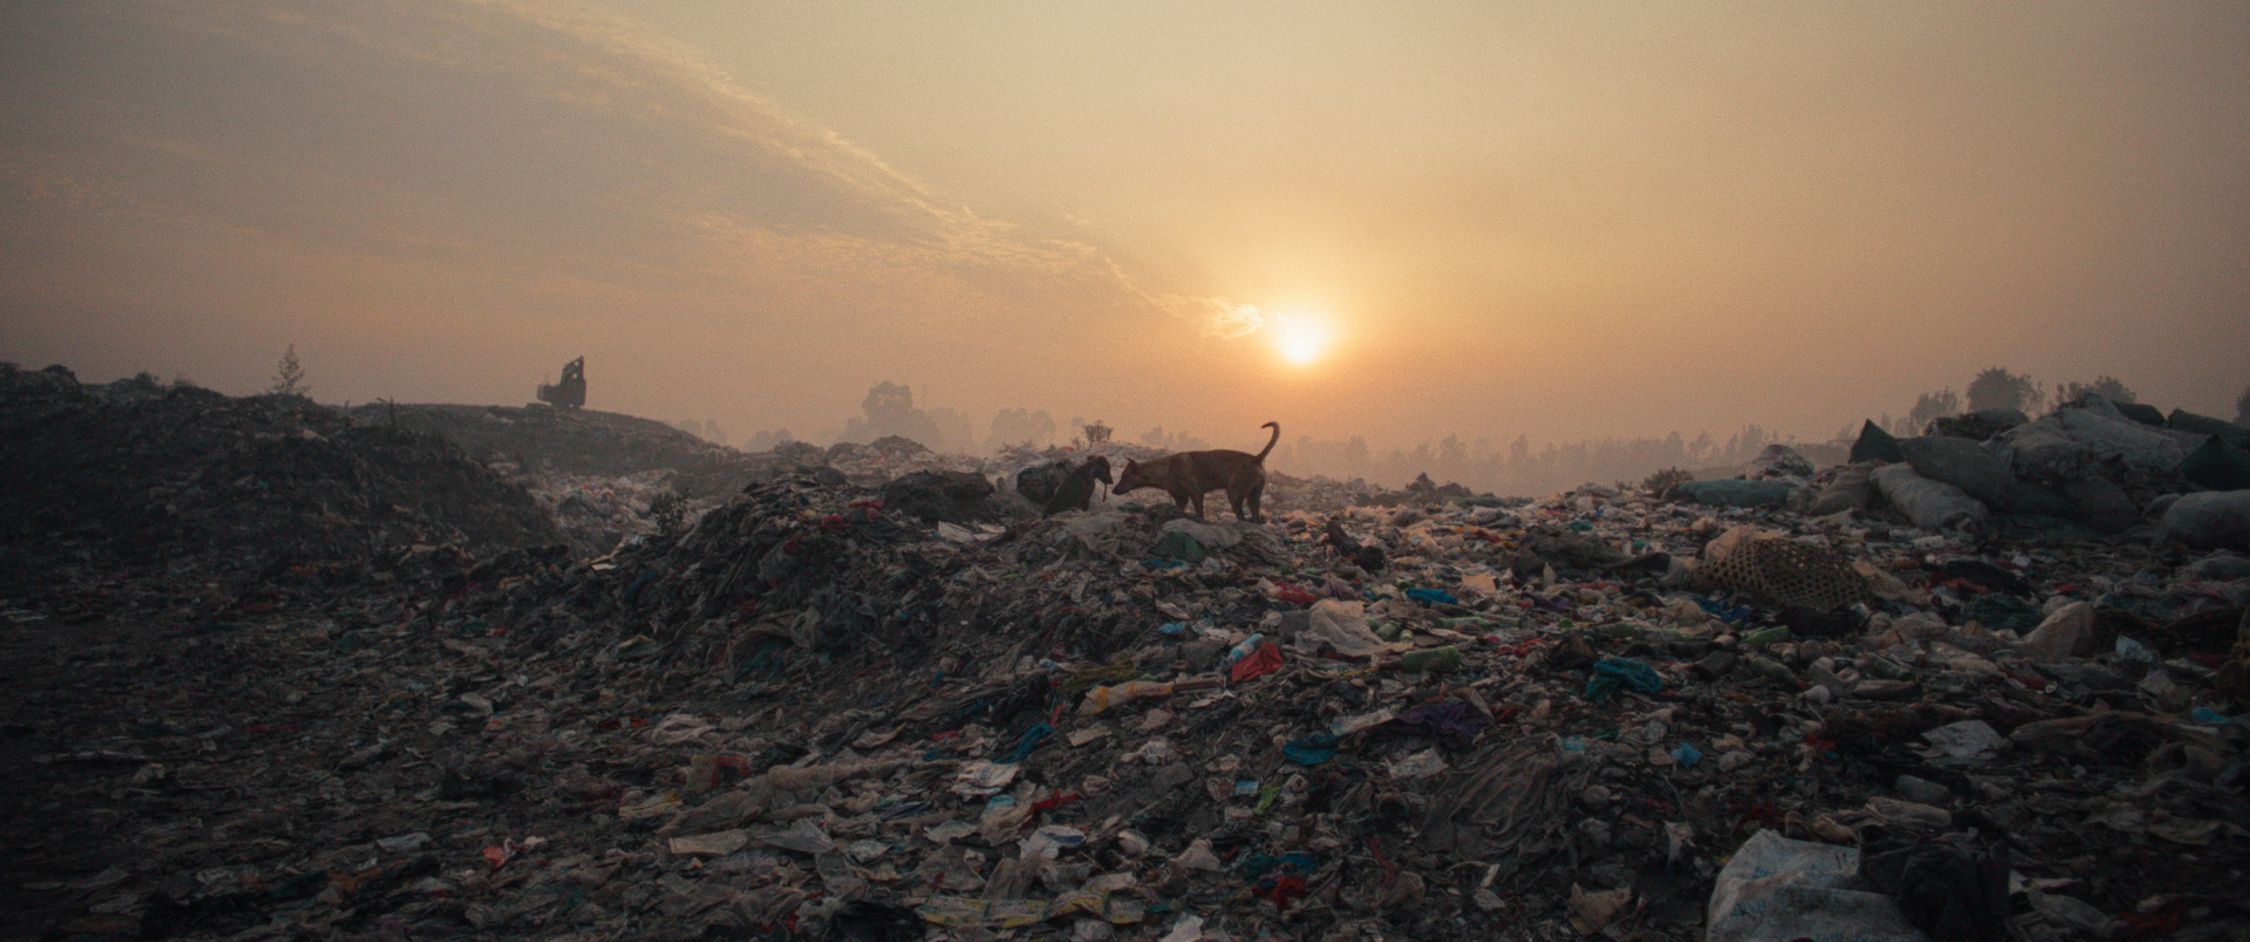 A dog stands atop a vast landscape of debris under a hazy sky, with the sun low on the horizon casting a warm glow over the scene. The landfill is littered with varied waste, and the dog's silhouette is outlined against the bright backdrop of the sun. The atmosphere appears calm yet somber, with the desolation of the waste and the solitary figure of the dog creating a poignant contrast.